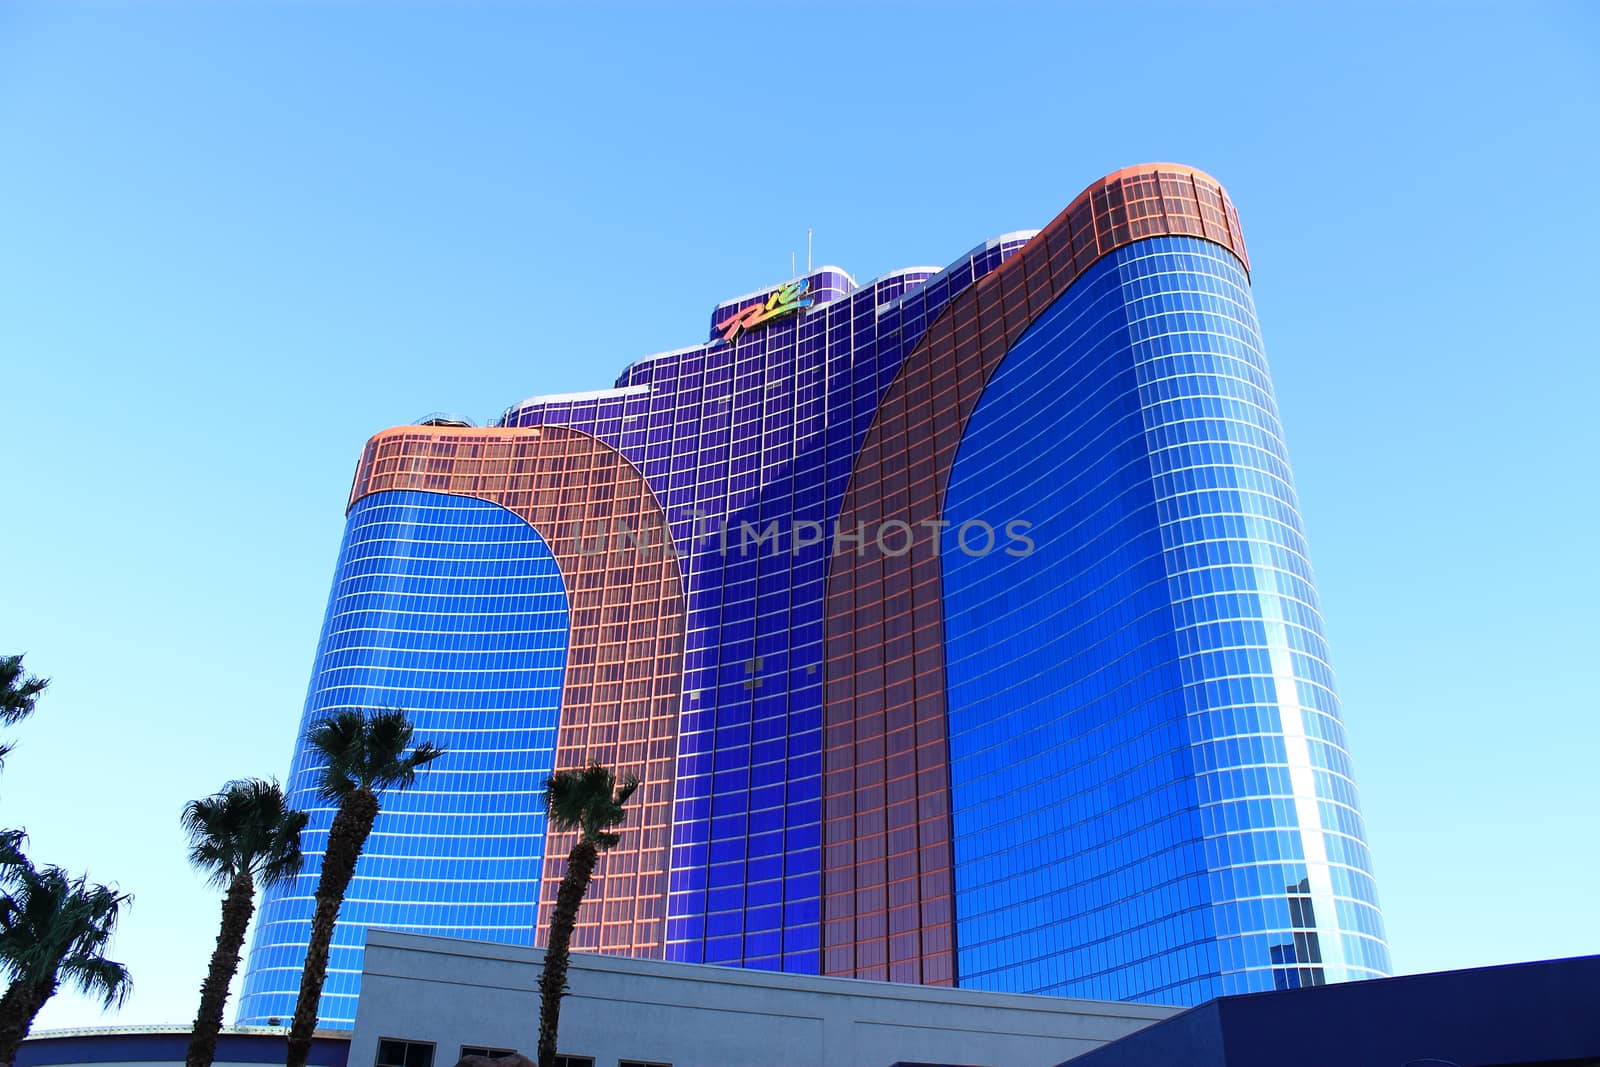 Rio Hotel and Casino by Ffooter